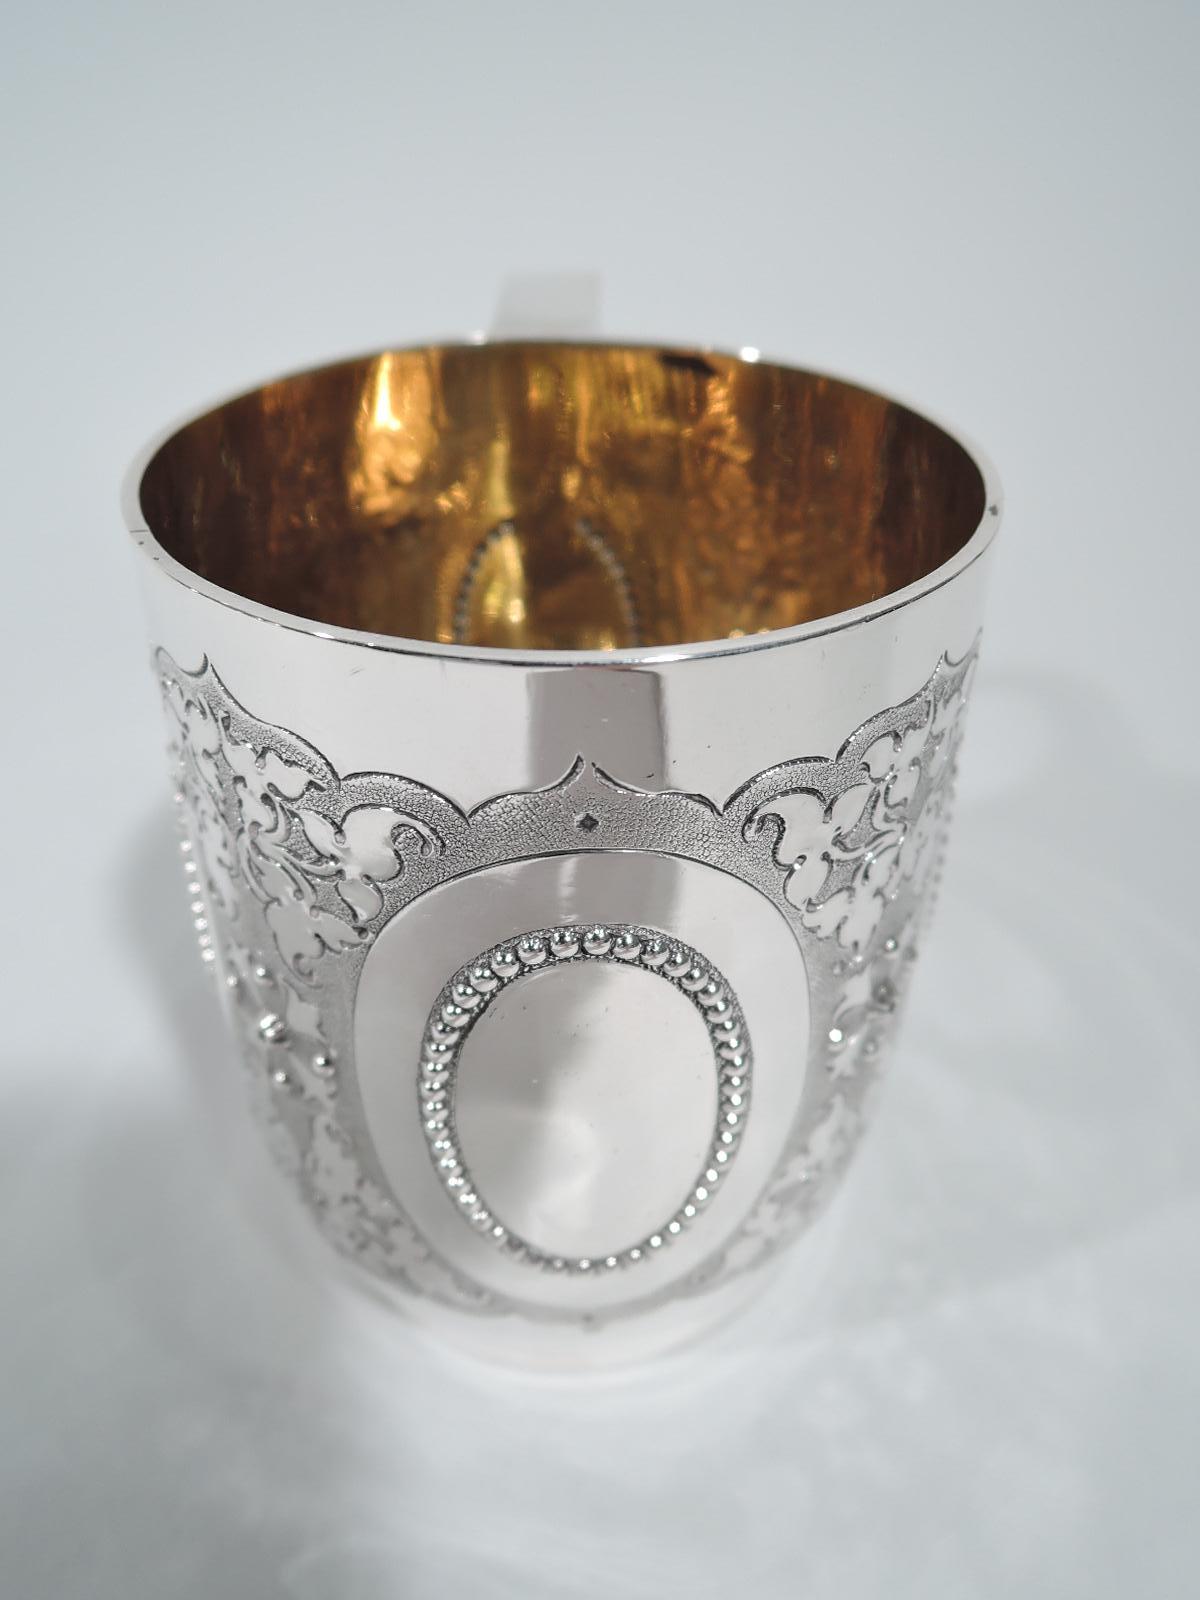 Victorian sterling silver baby cup. Made by Daniel & Charles Houle in London in 1857. Upward tapering sides, swooping s-scroll handle with heart terminal, and short foot. Beaded oval rings (vacant) surrounded by stylized leaves and flowers on